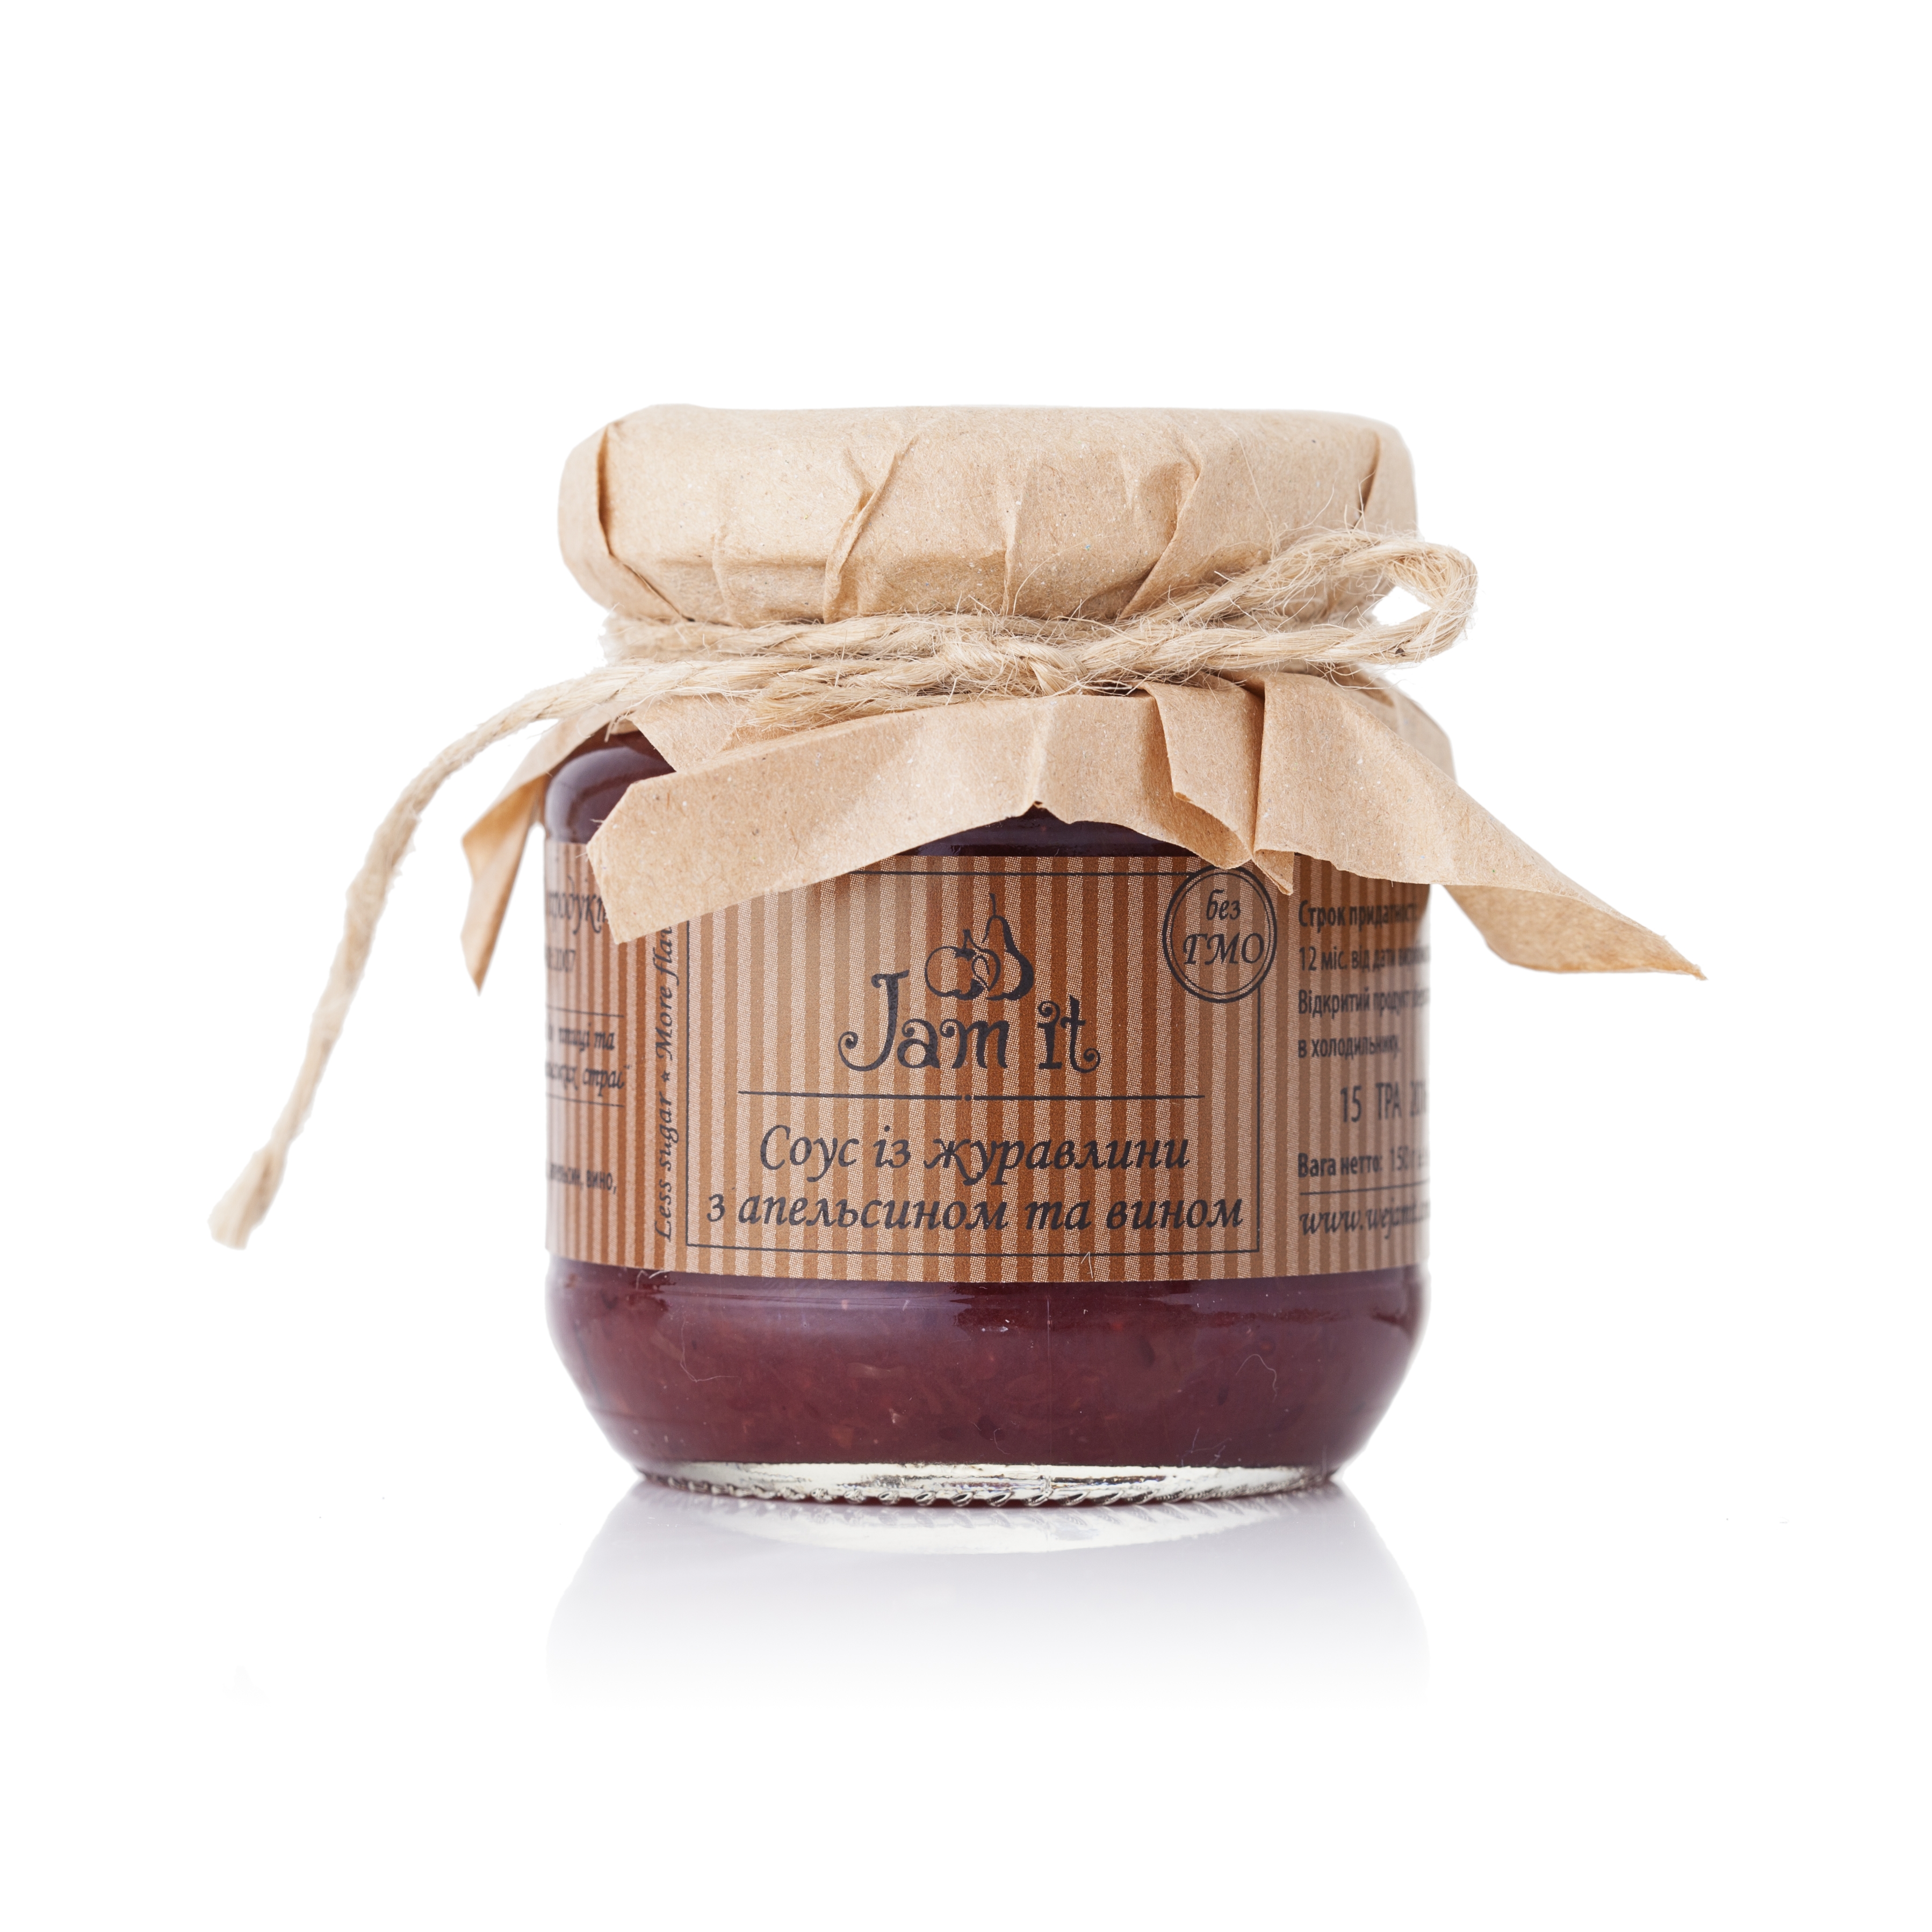 Product Cranberry sauce with orange and wine